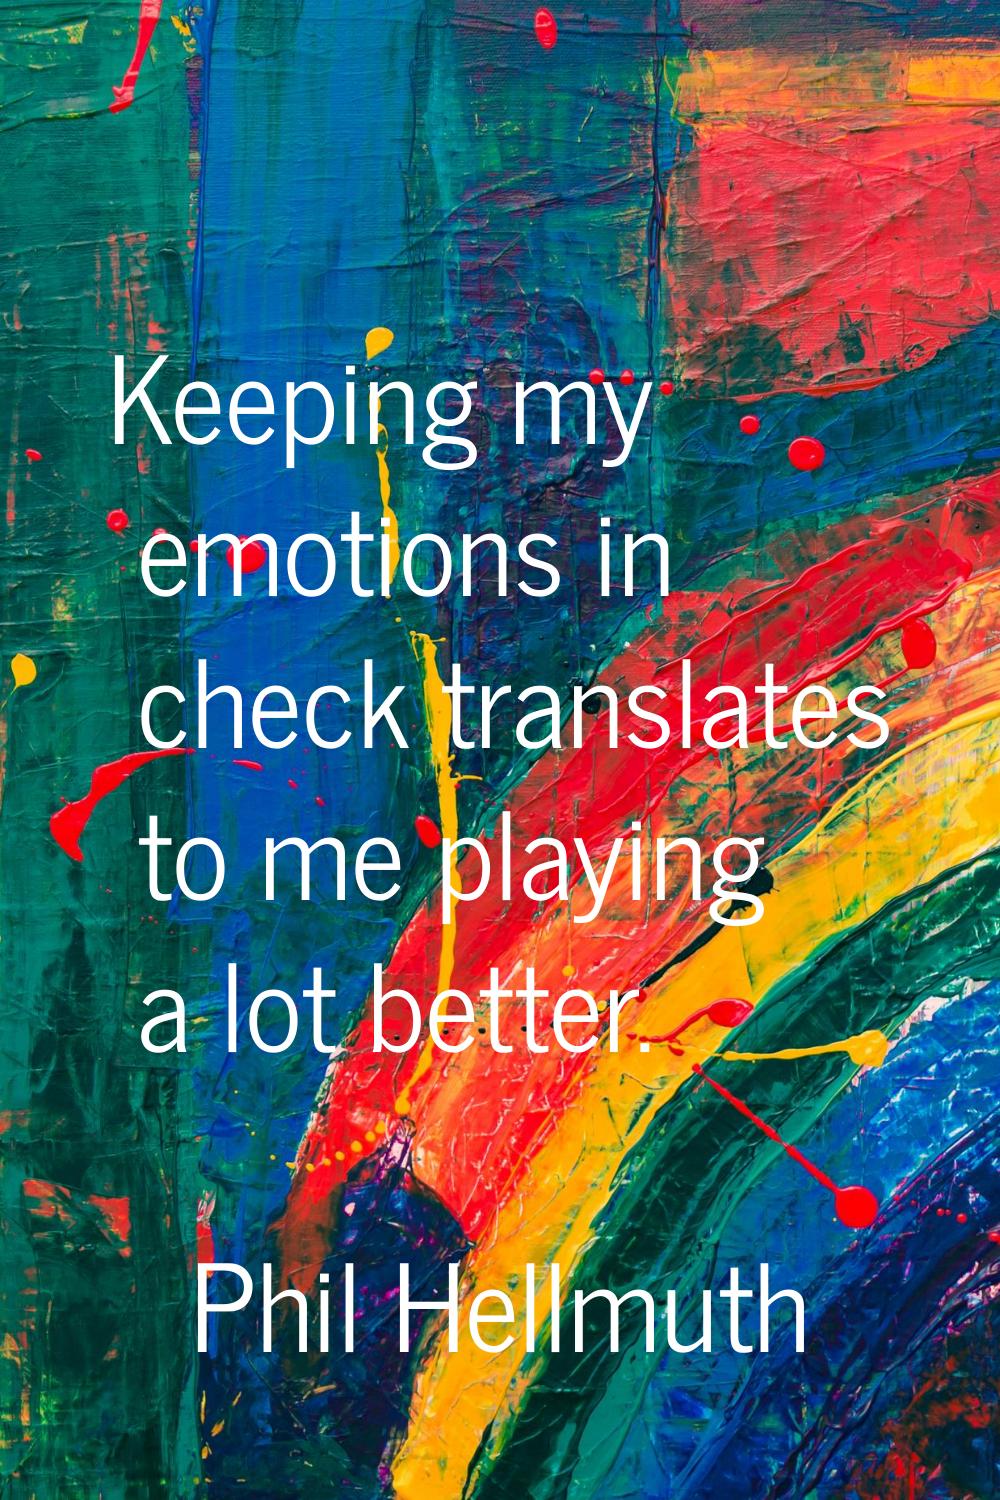 Keeping my emotions in check translates to me playing a lot better.